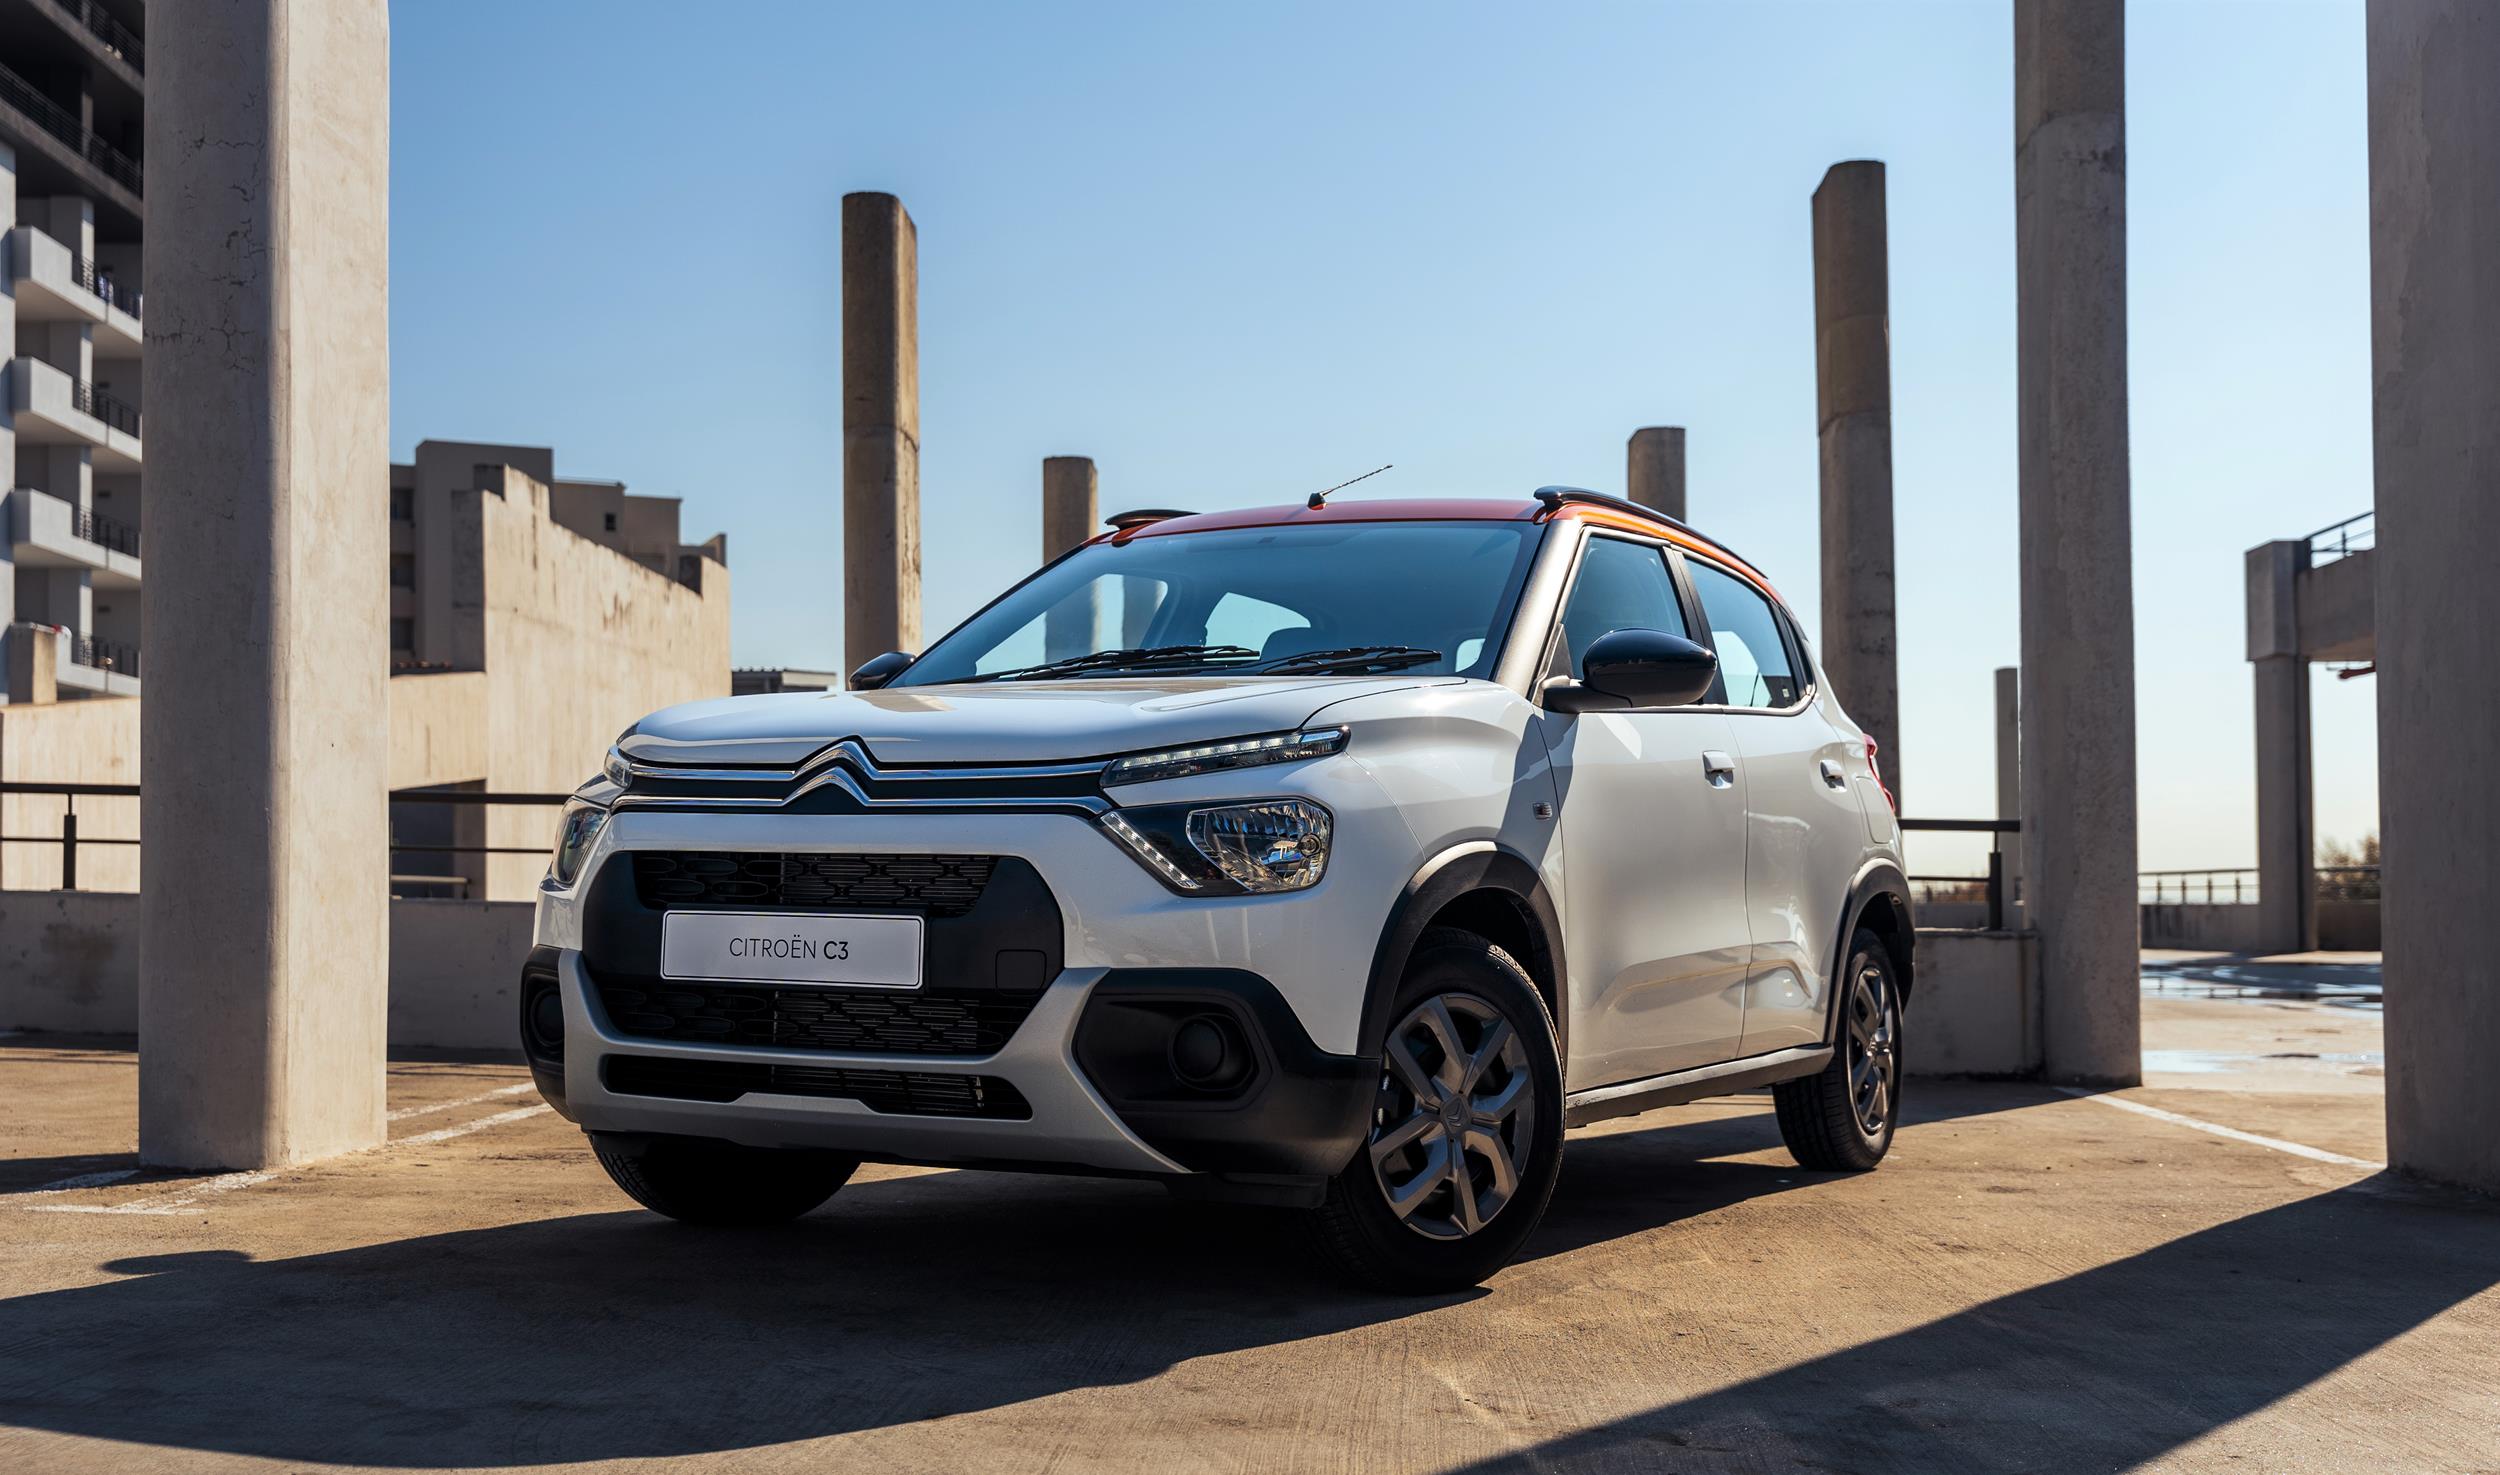 Budget-busting Citroen C3 goes on sale in SA